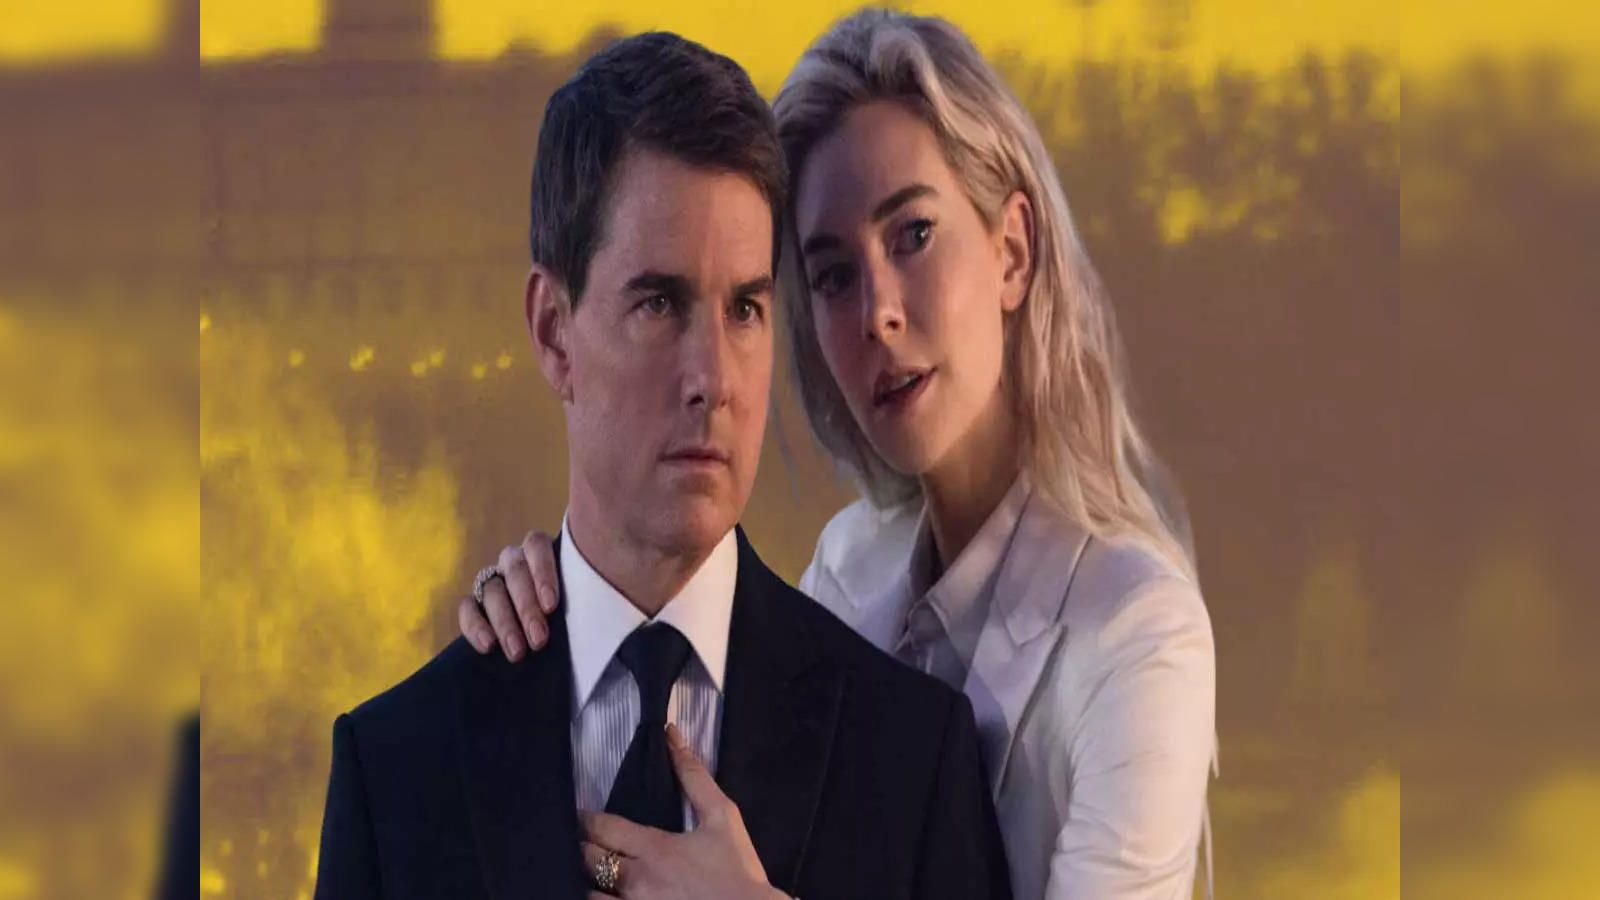 Mission: Impossible – Dead Reckoning Part One: Mission: Impossible – Dead  Reckoning Part One gets 98% score on Rotten Tomatoes; details inside - The  Economic Times